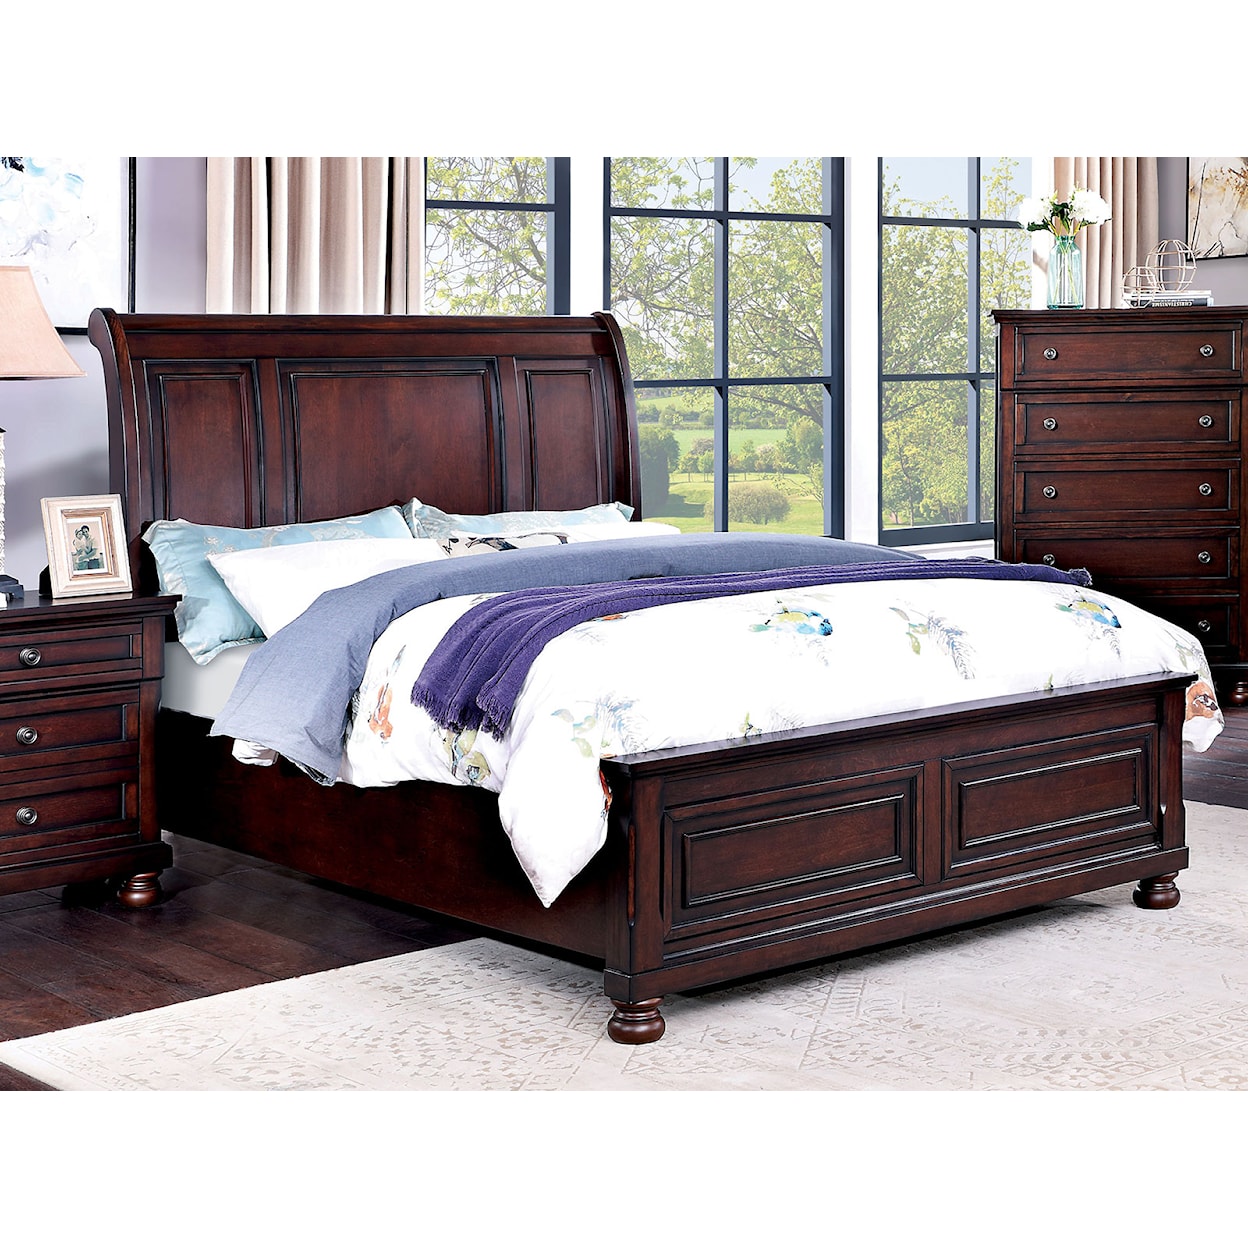 Furniture of America Wells King Bed